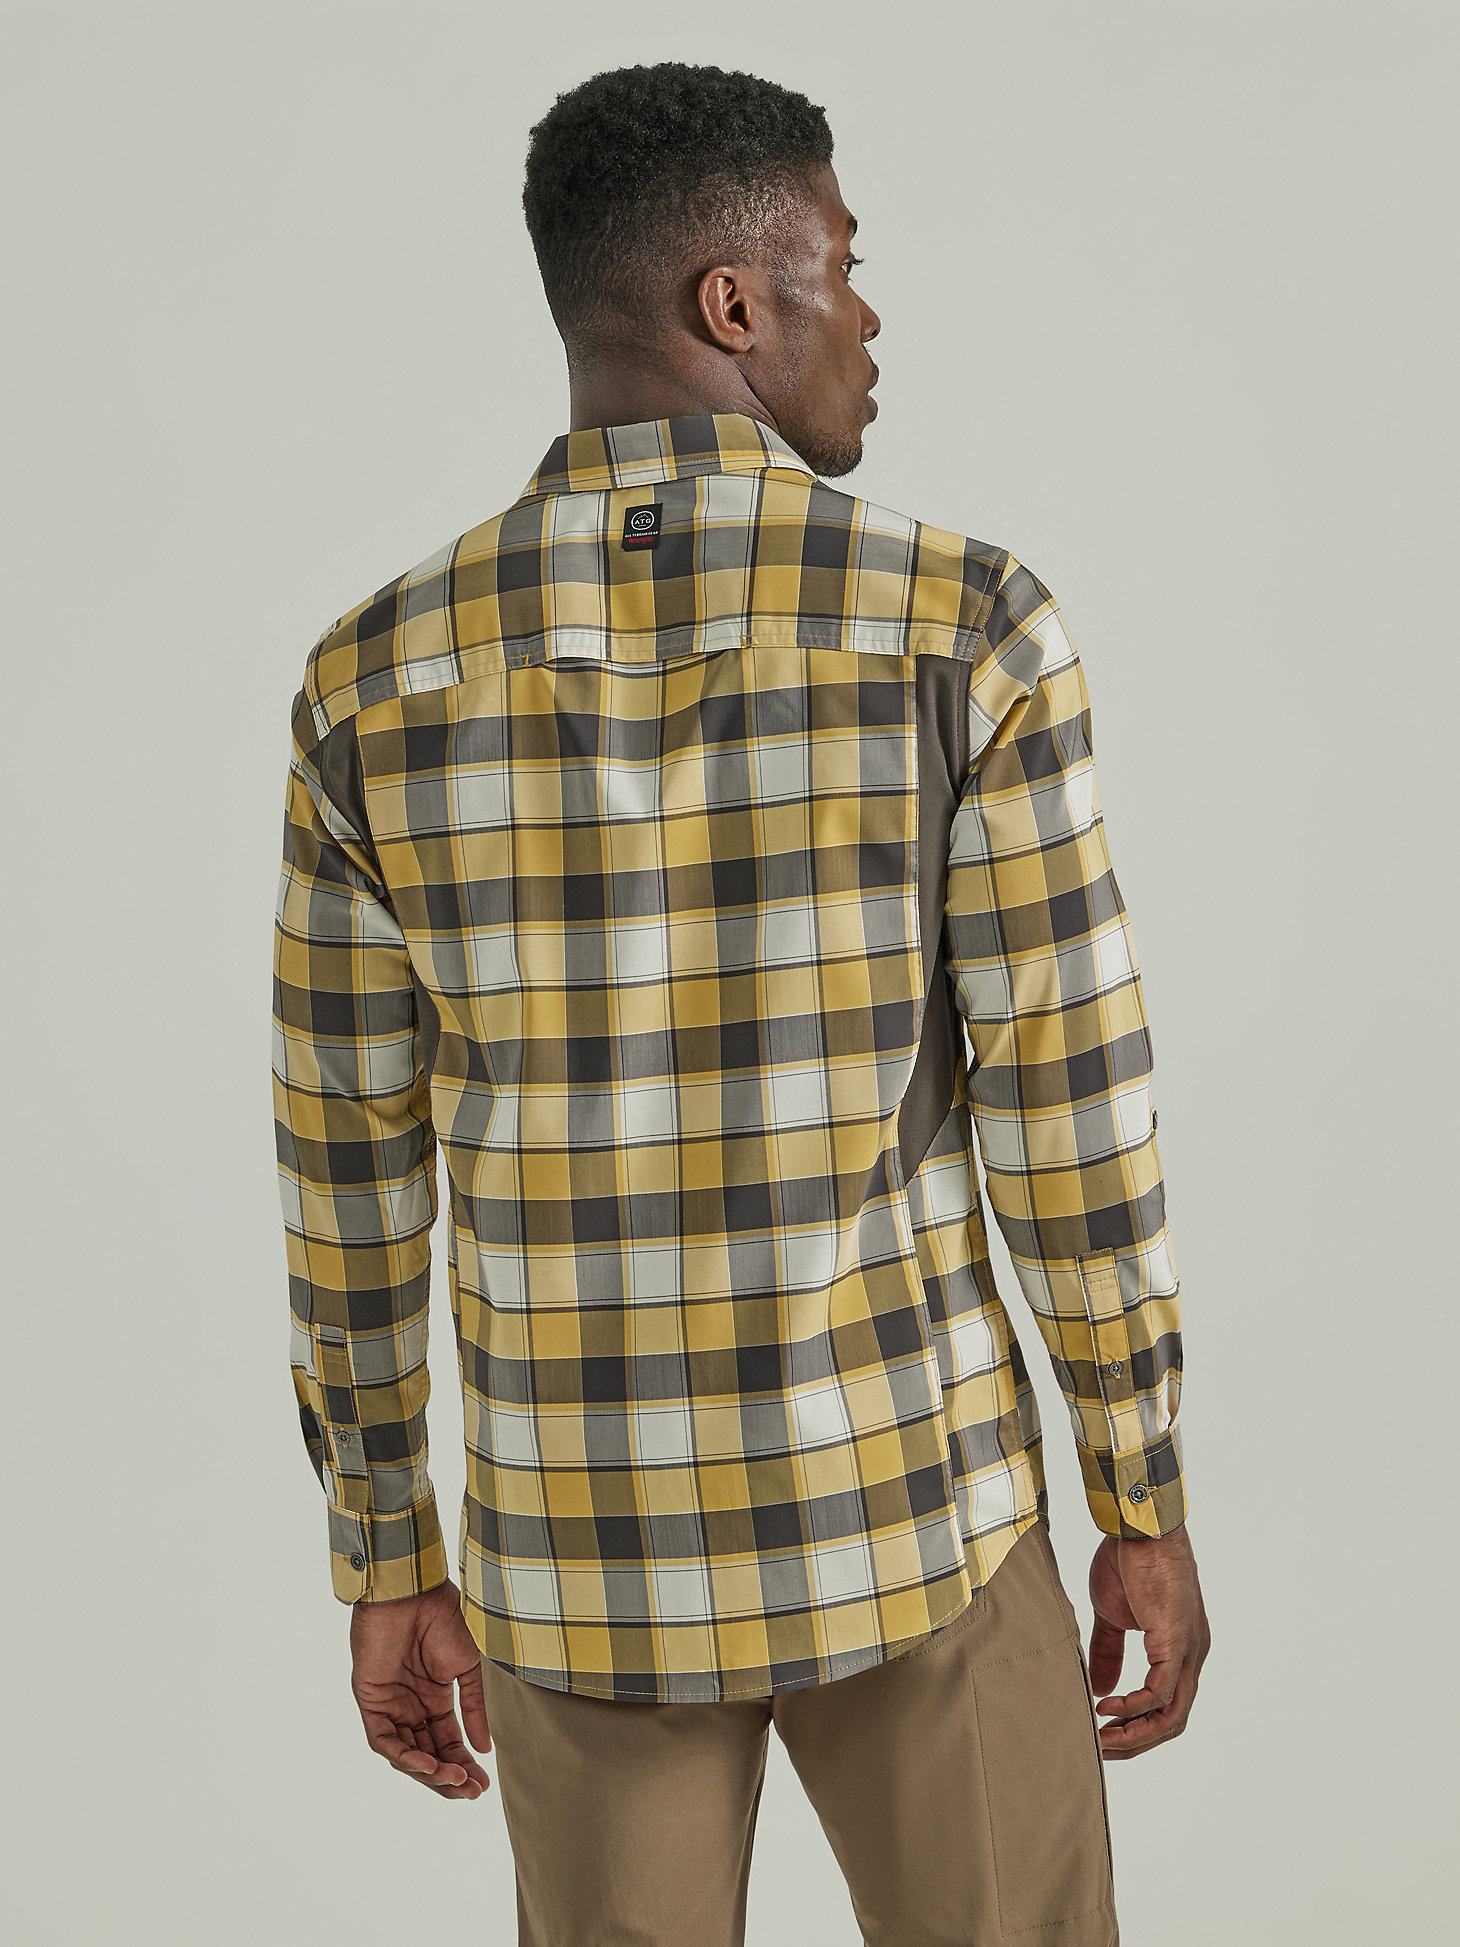 ATG By Wrangler™ Plaid Mixed Material Shirt in Travertine alternative view 2